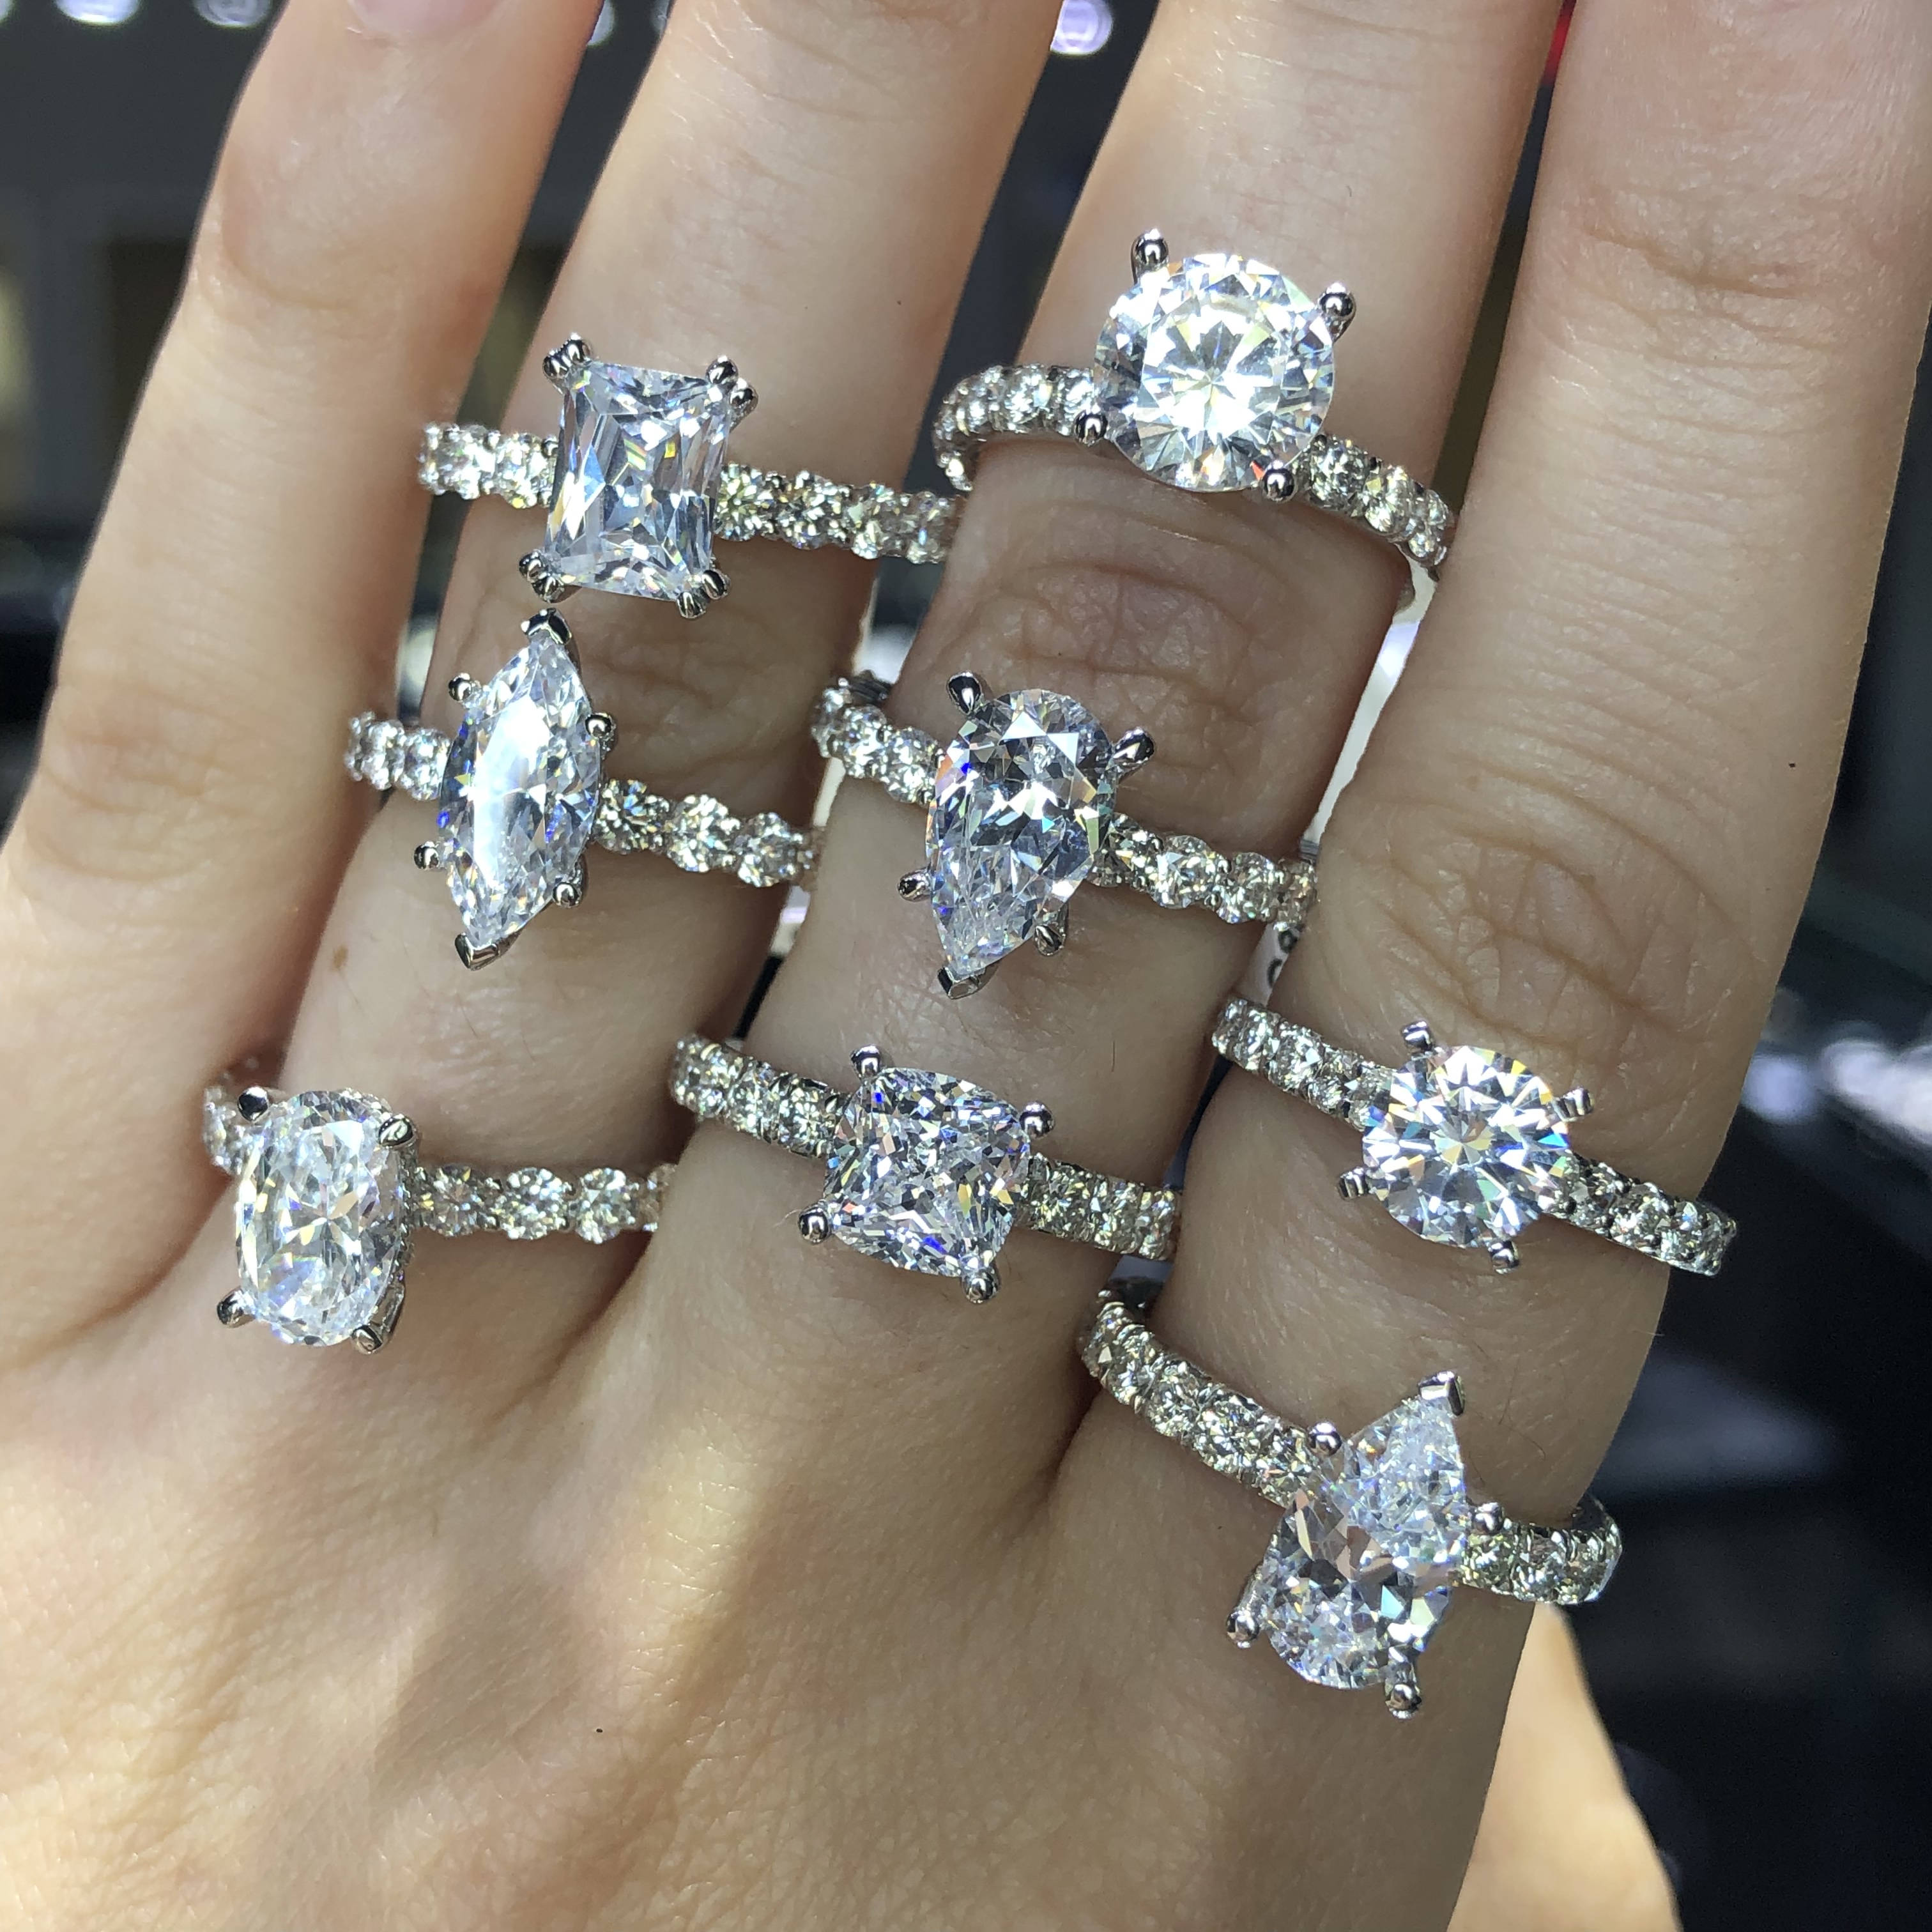 How much to spend on creating a custom made engagement ring